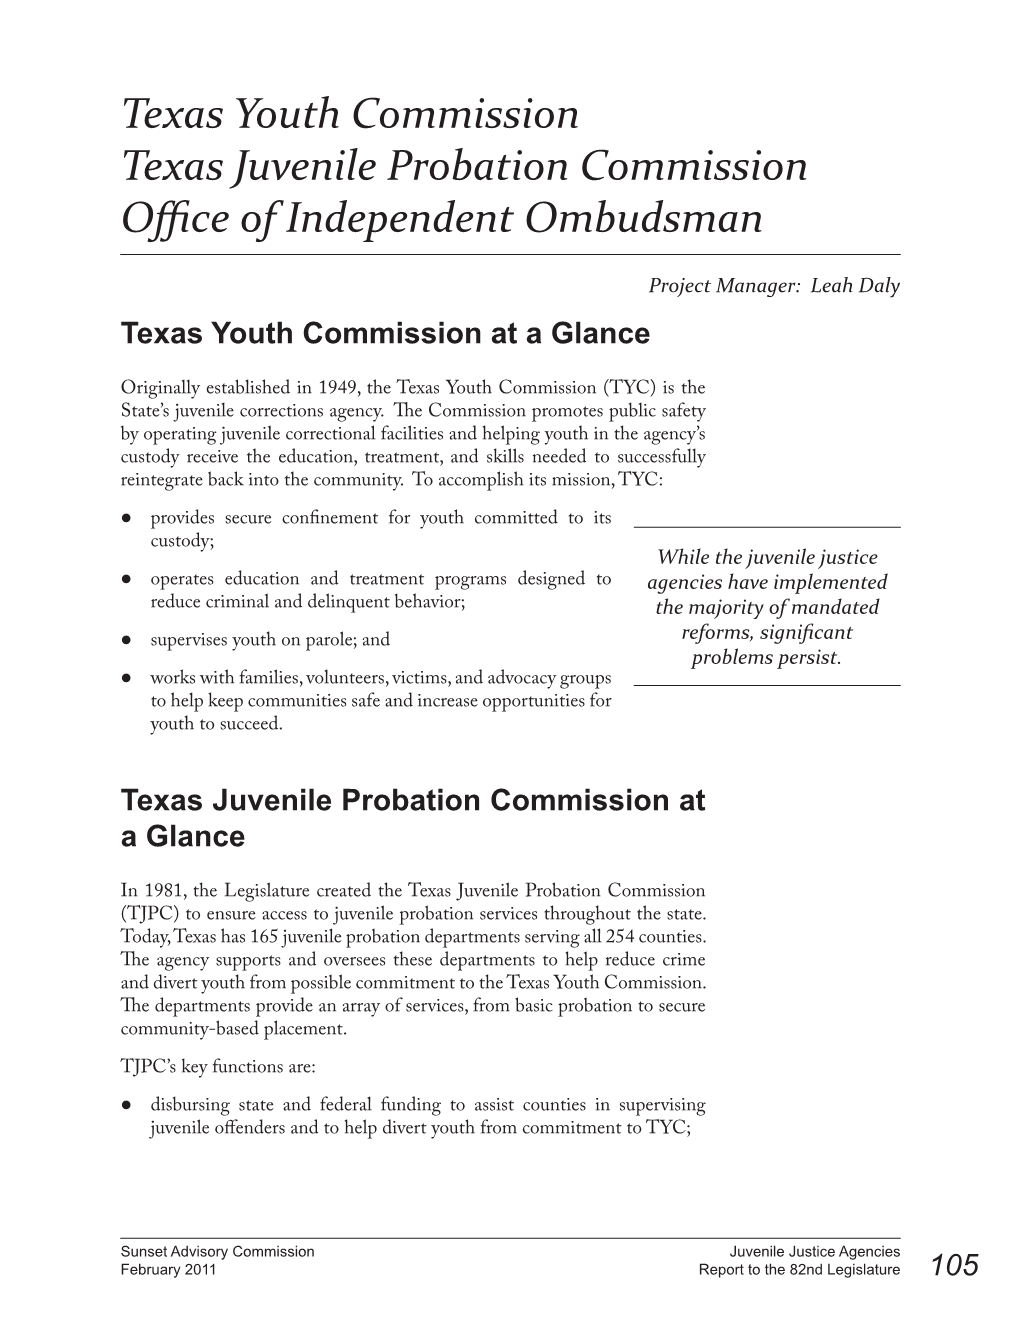 Texas Youth Commission Texas Juvenile Probation Commission Office of Independent Ombudsman